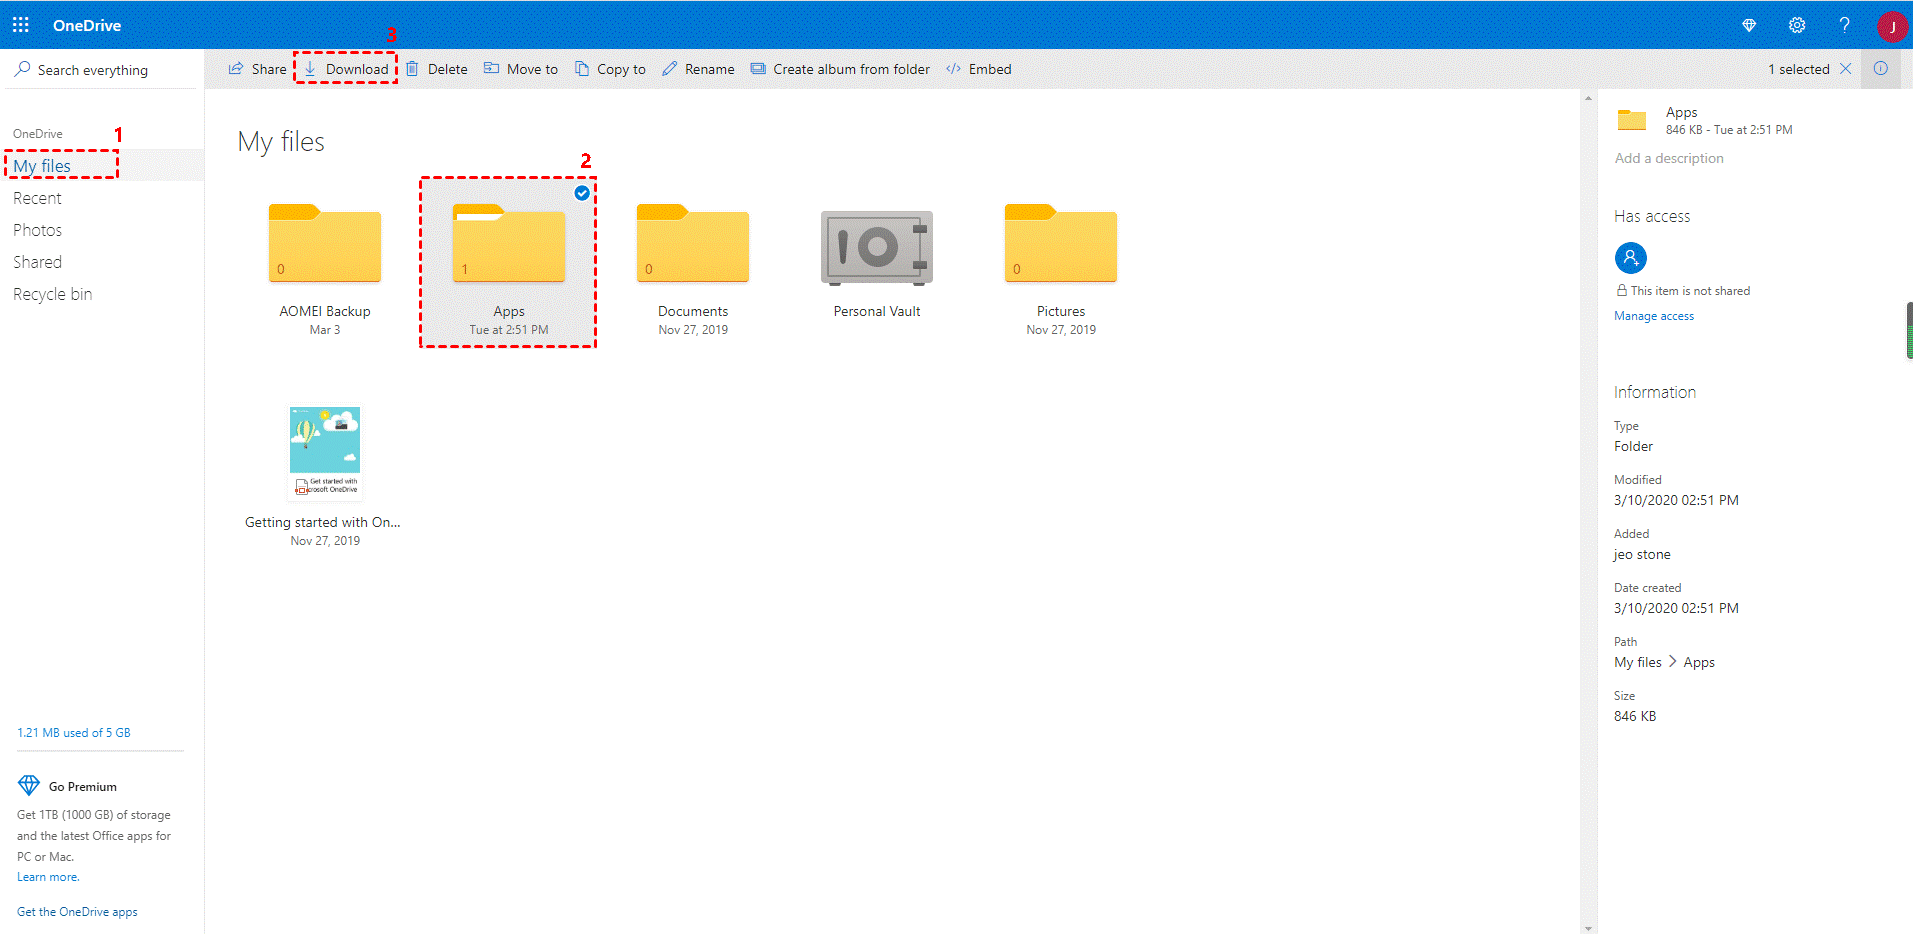 Download Files from OneDrive